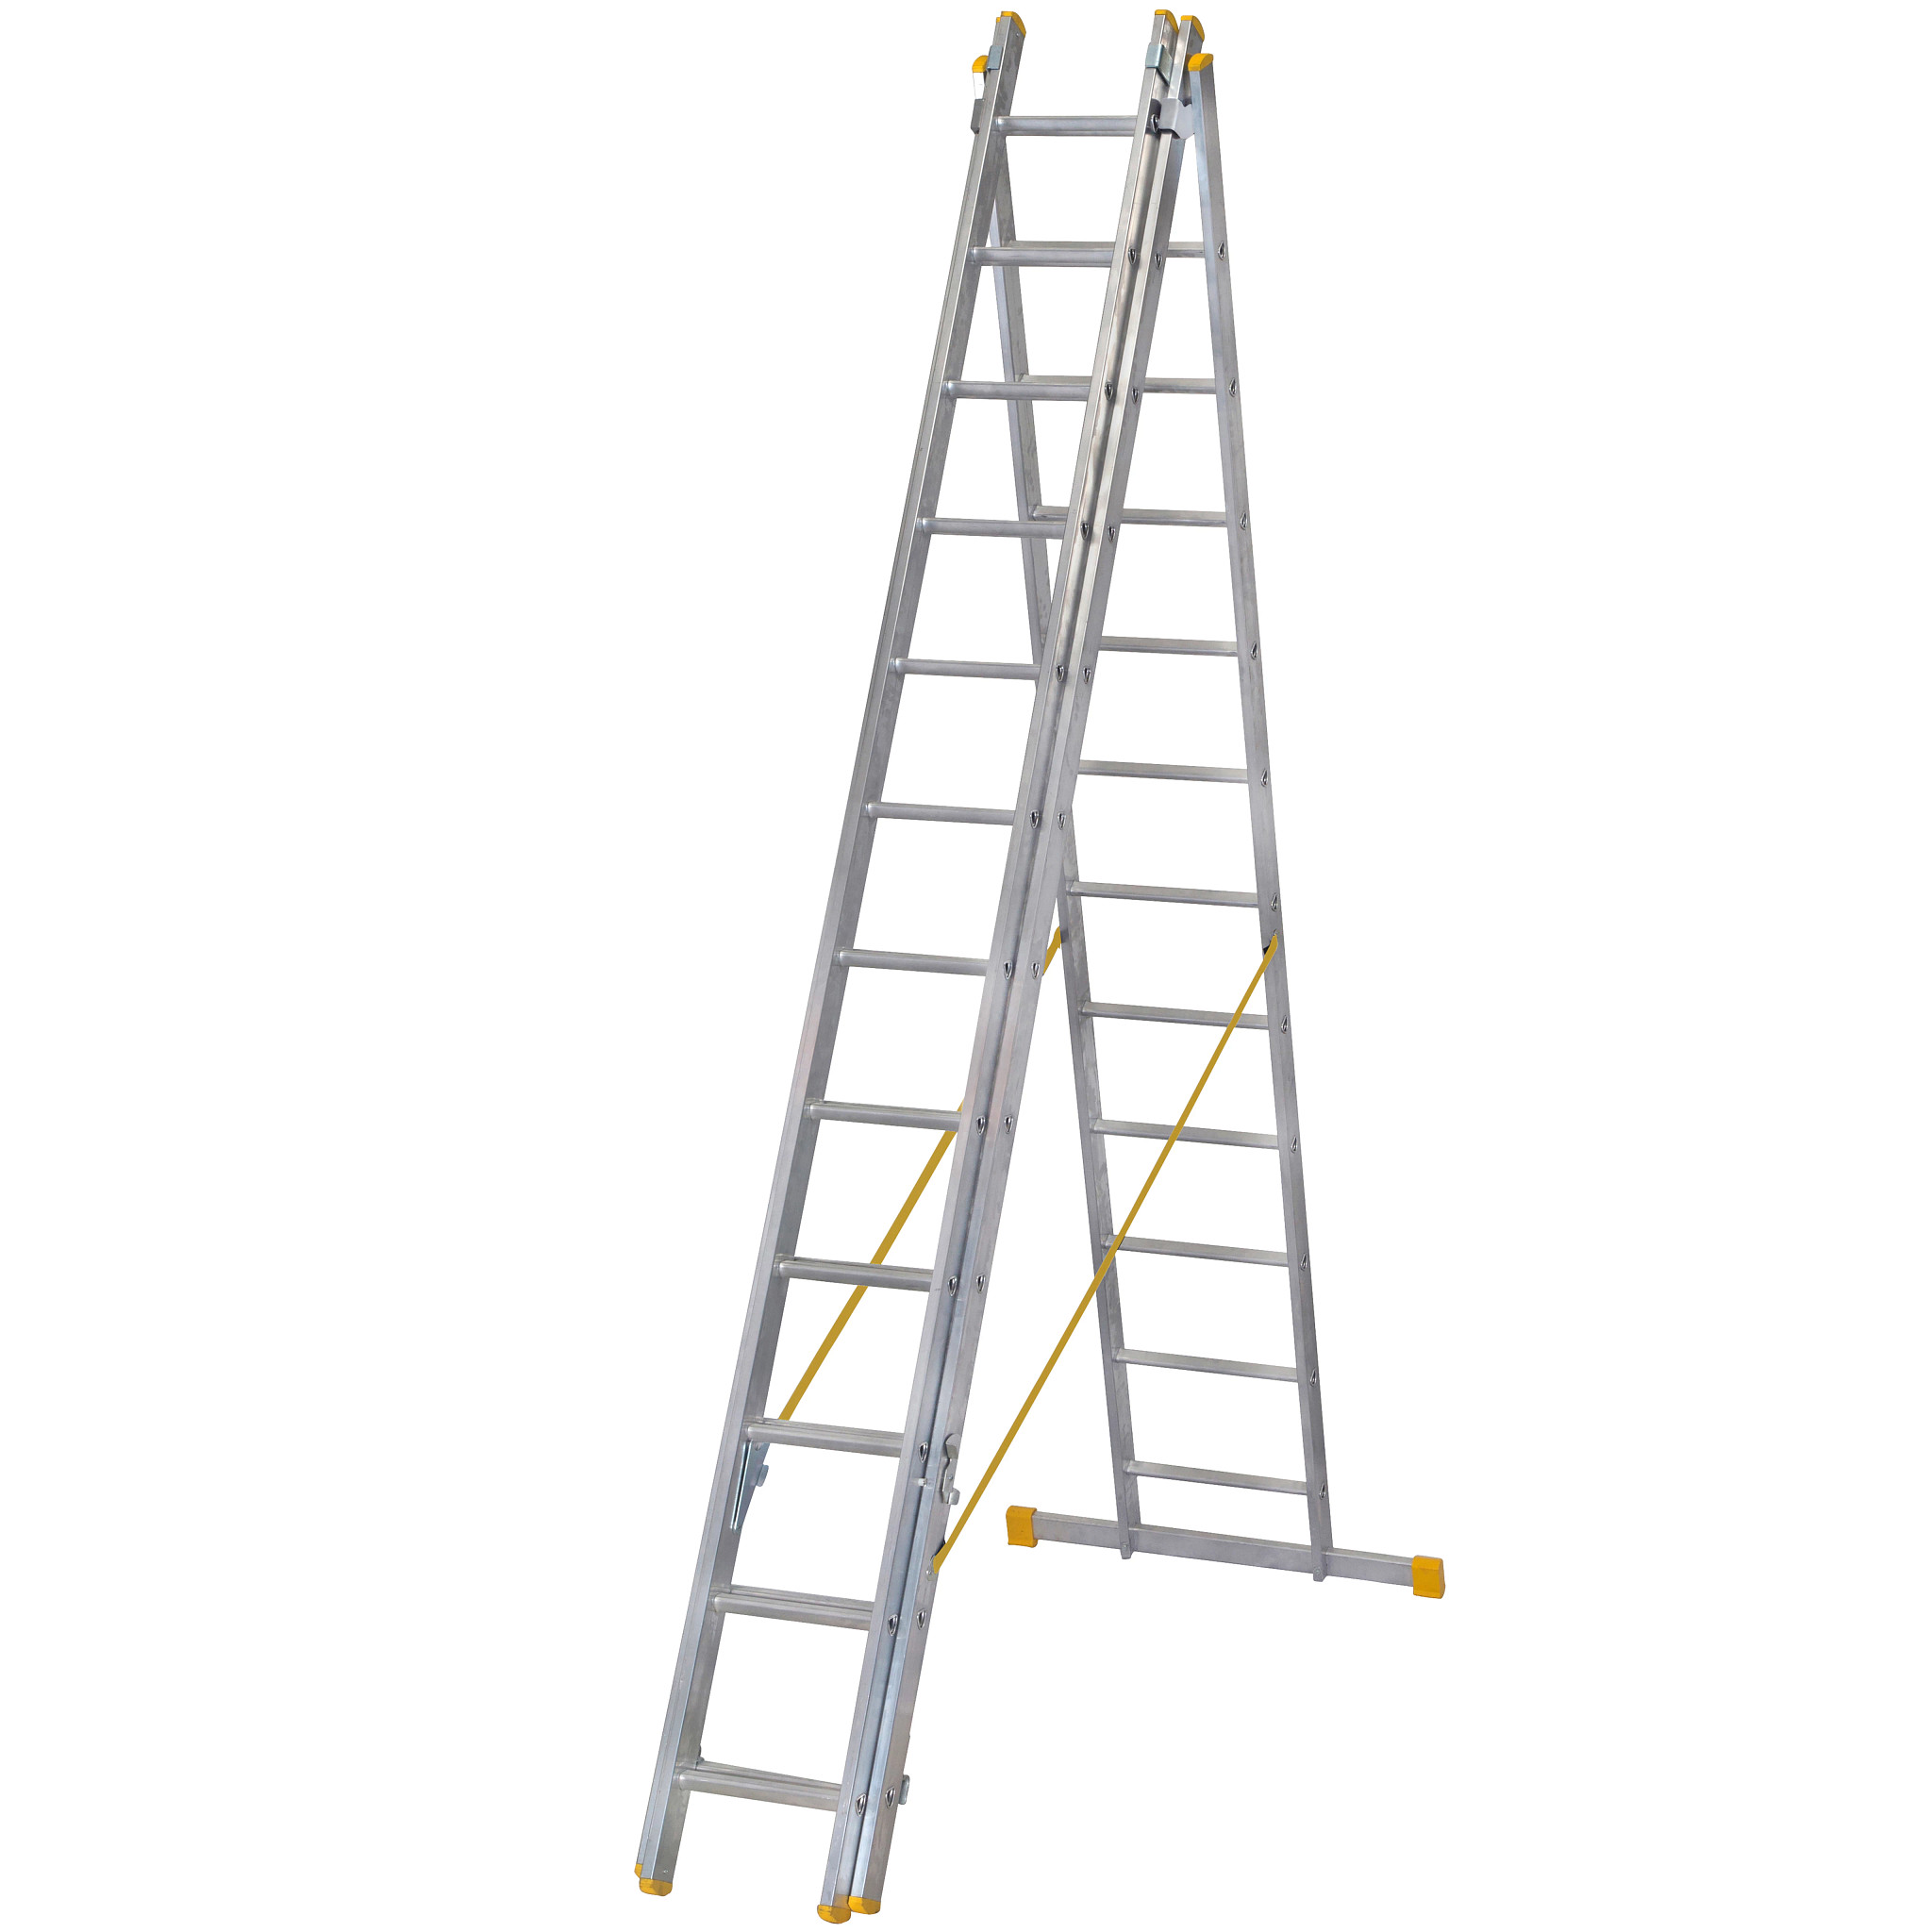 x4 Werner 725 Series Aluminium Box Section Triple Extension Plus Ladder New 